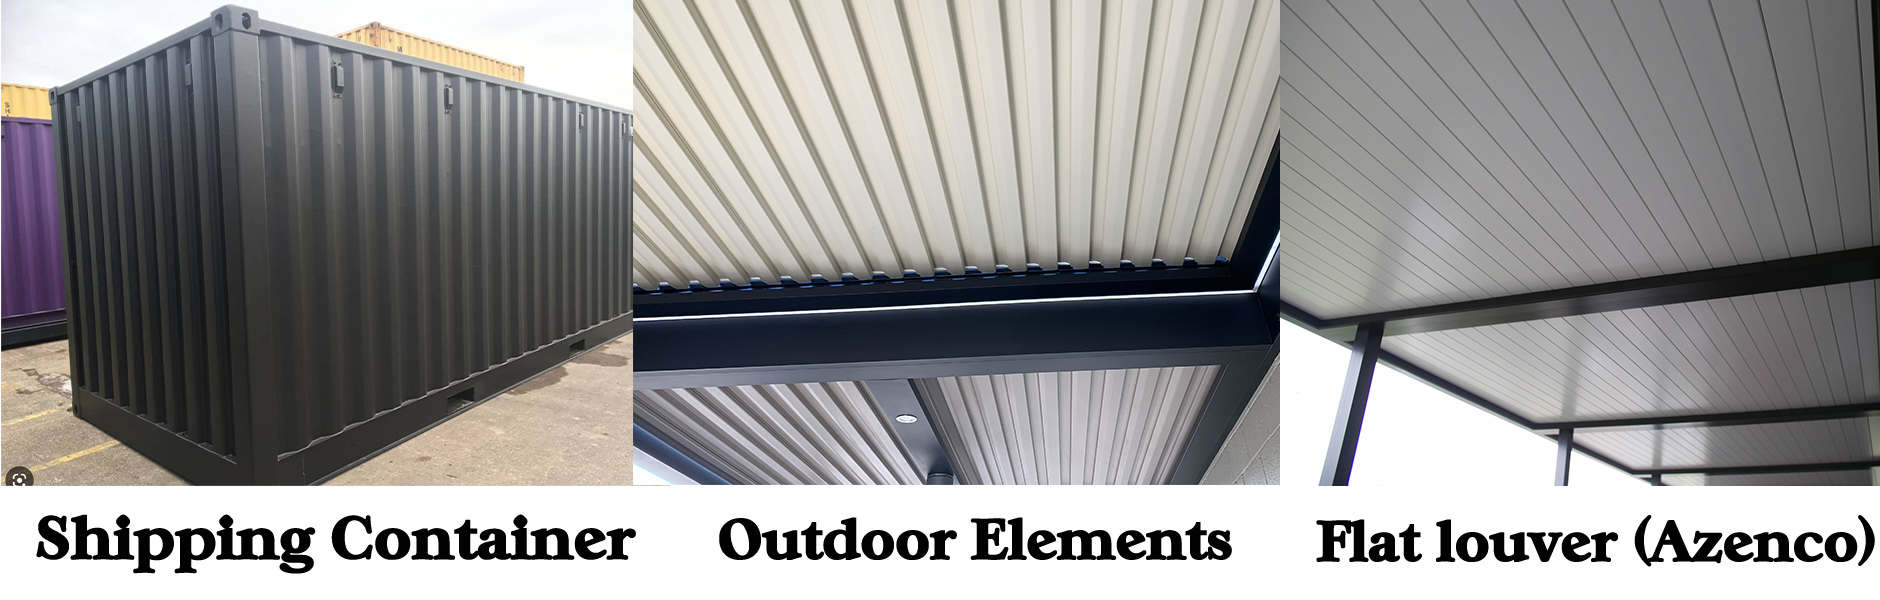 Louvered patio cover systems